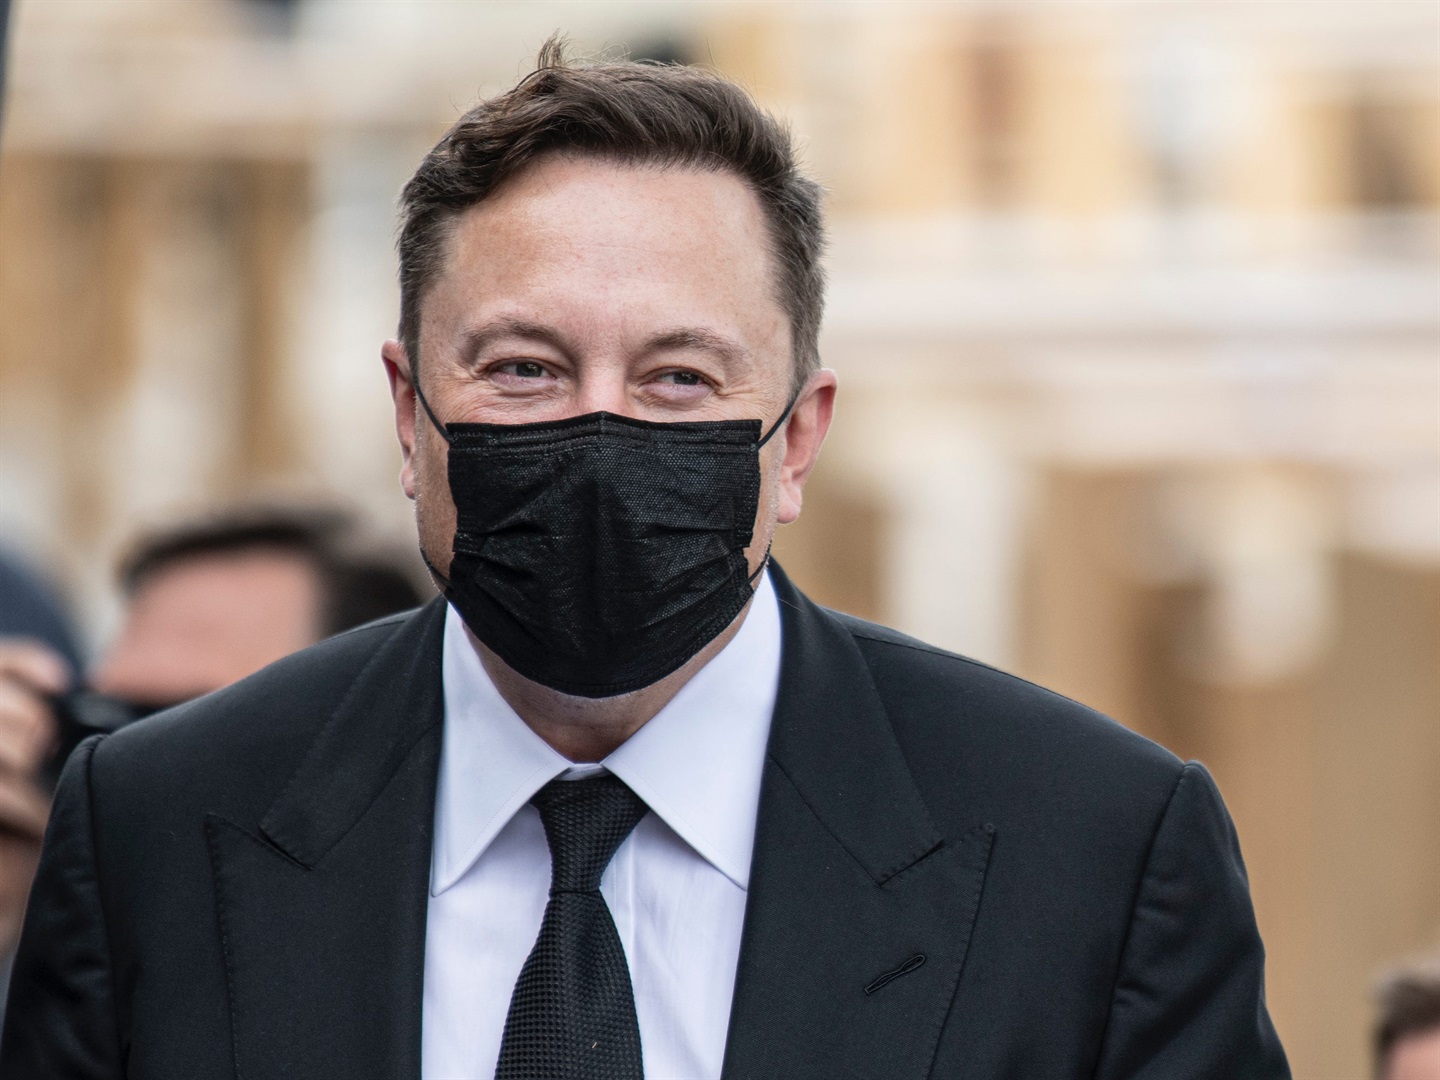 Tesla CEO Elon Musk. Fabian Sommer/picture alliance via Getty Images